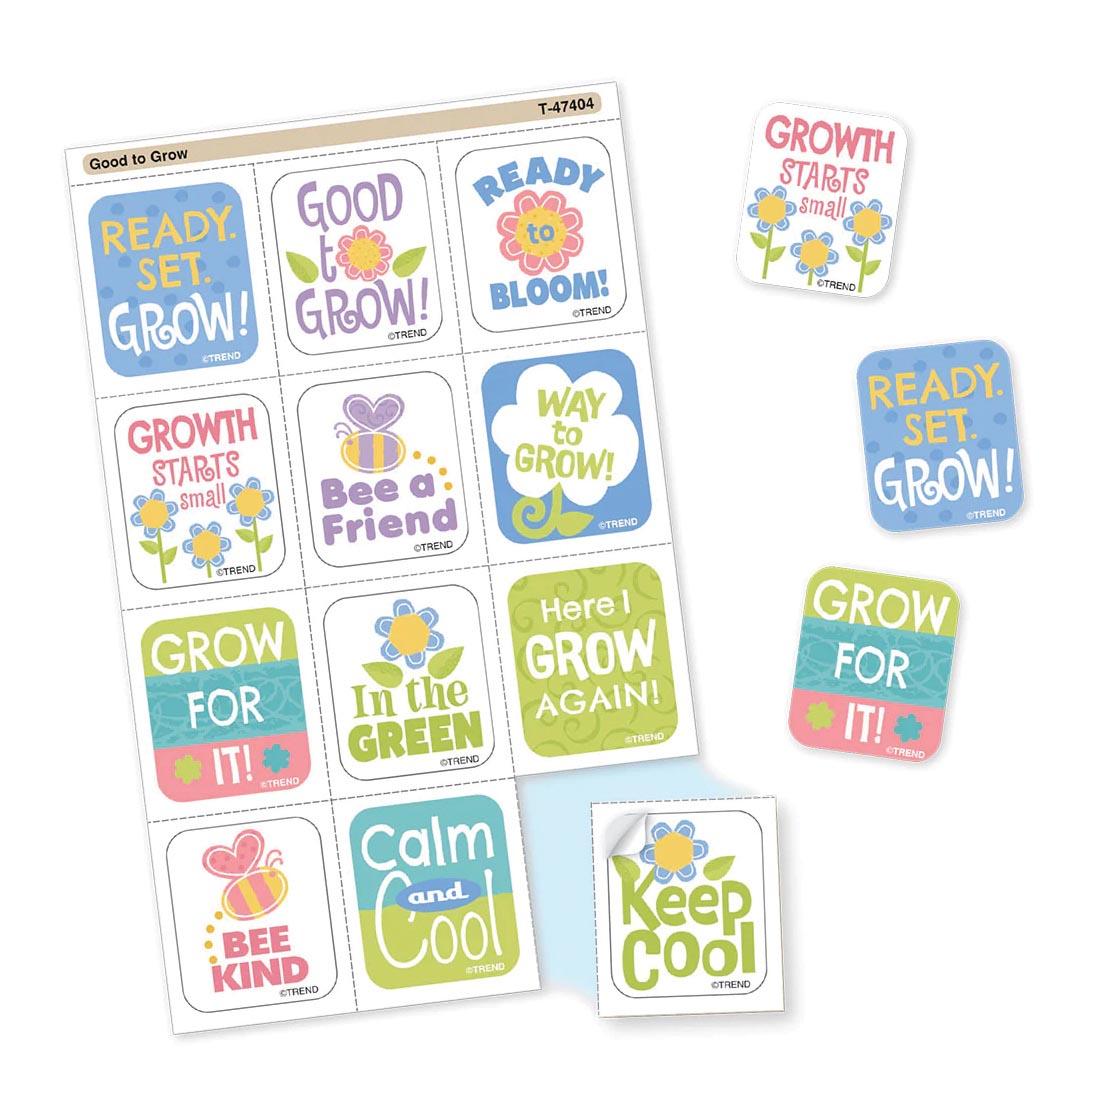 Tear & Share Stickers from the Good To Grow collection by TREND